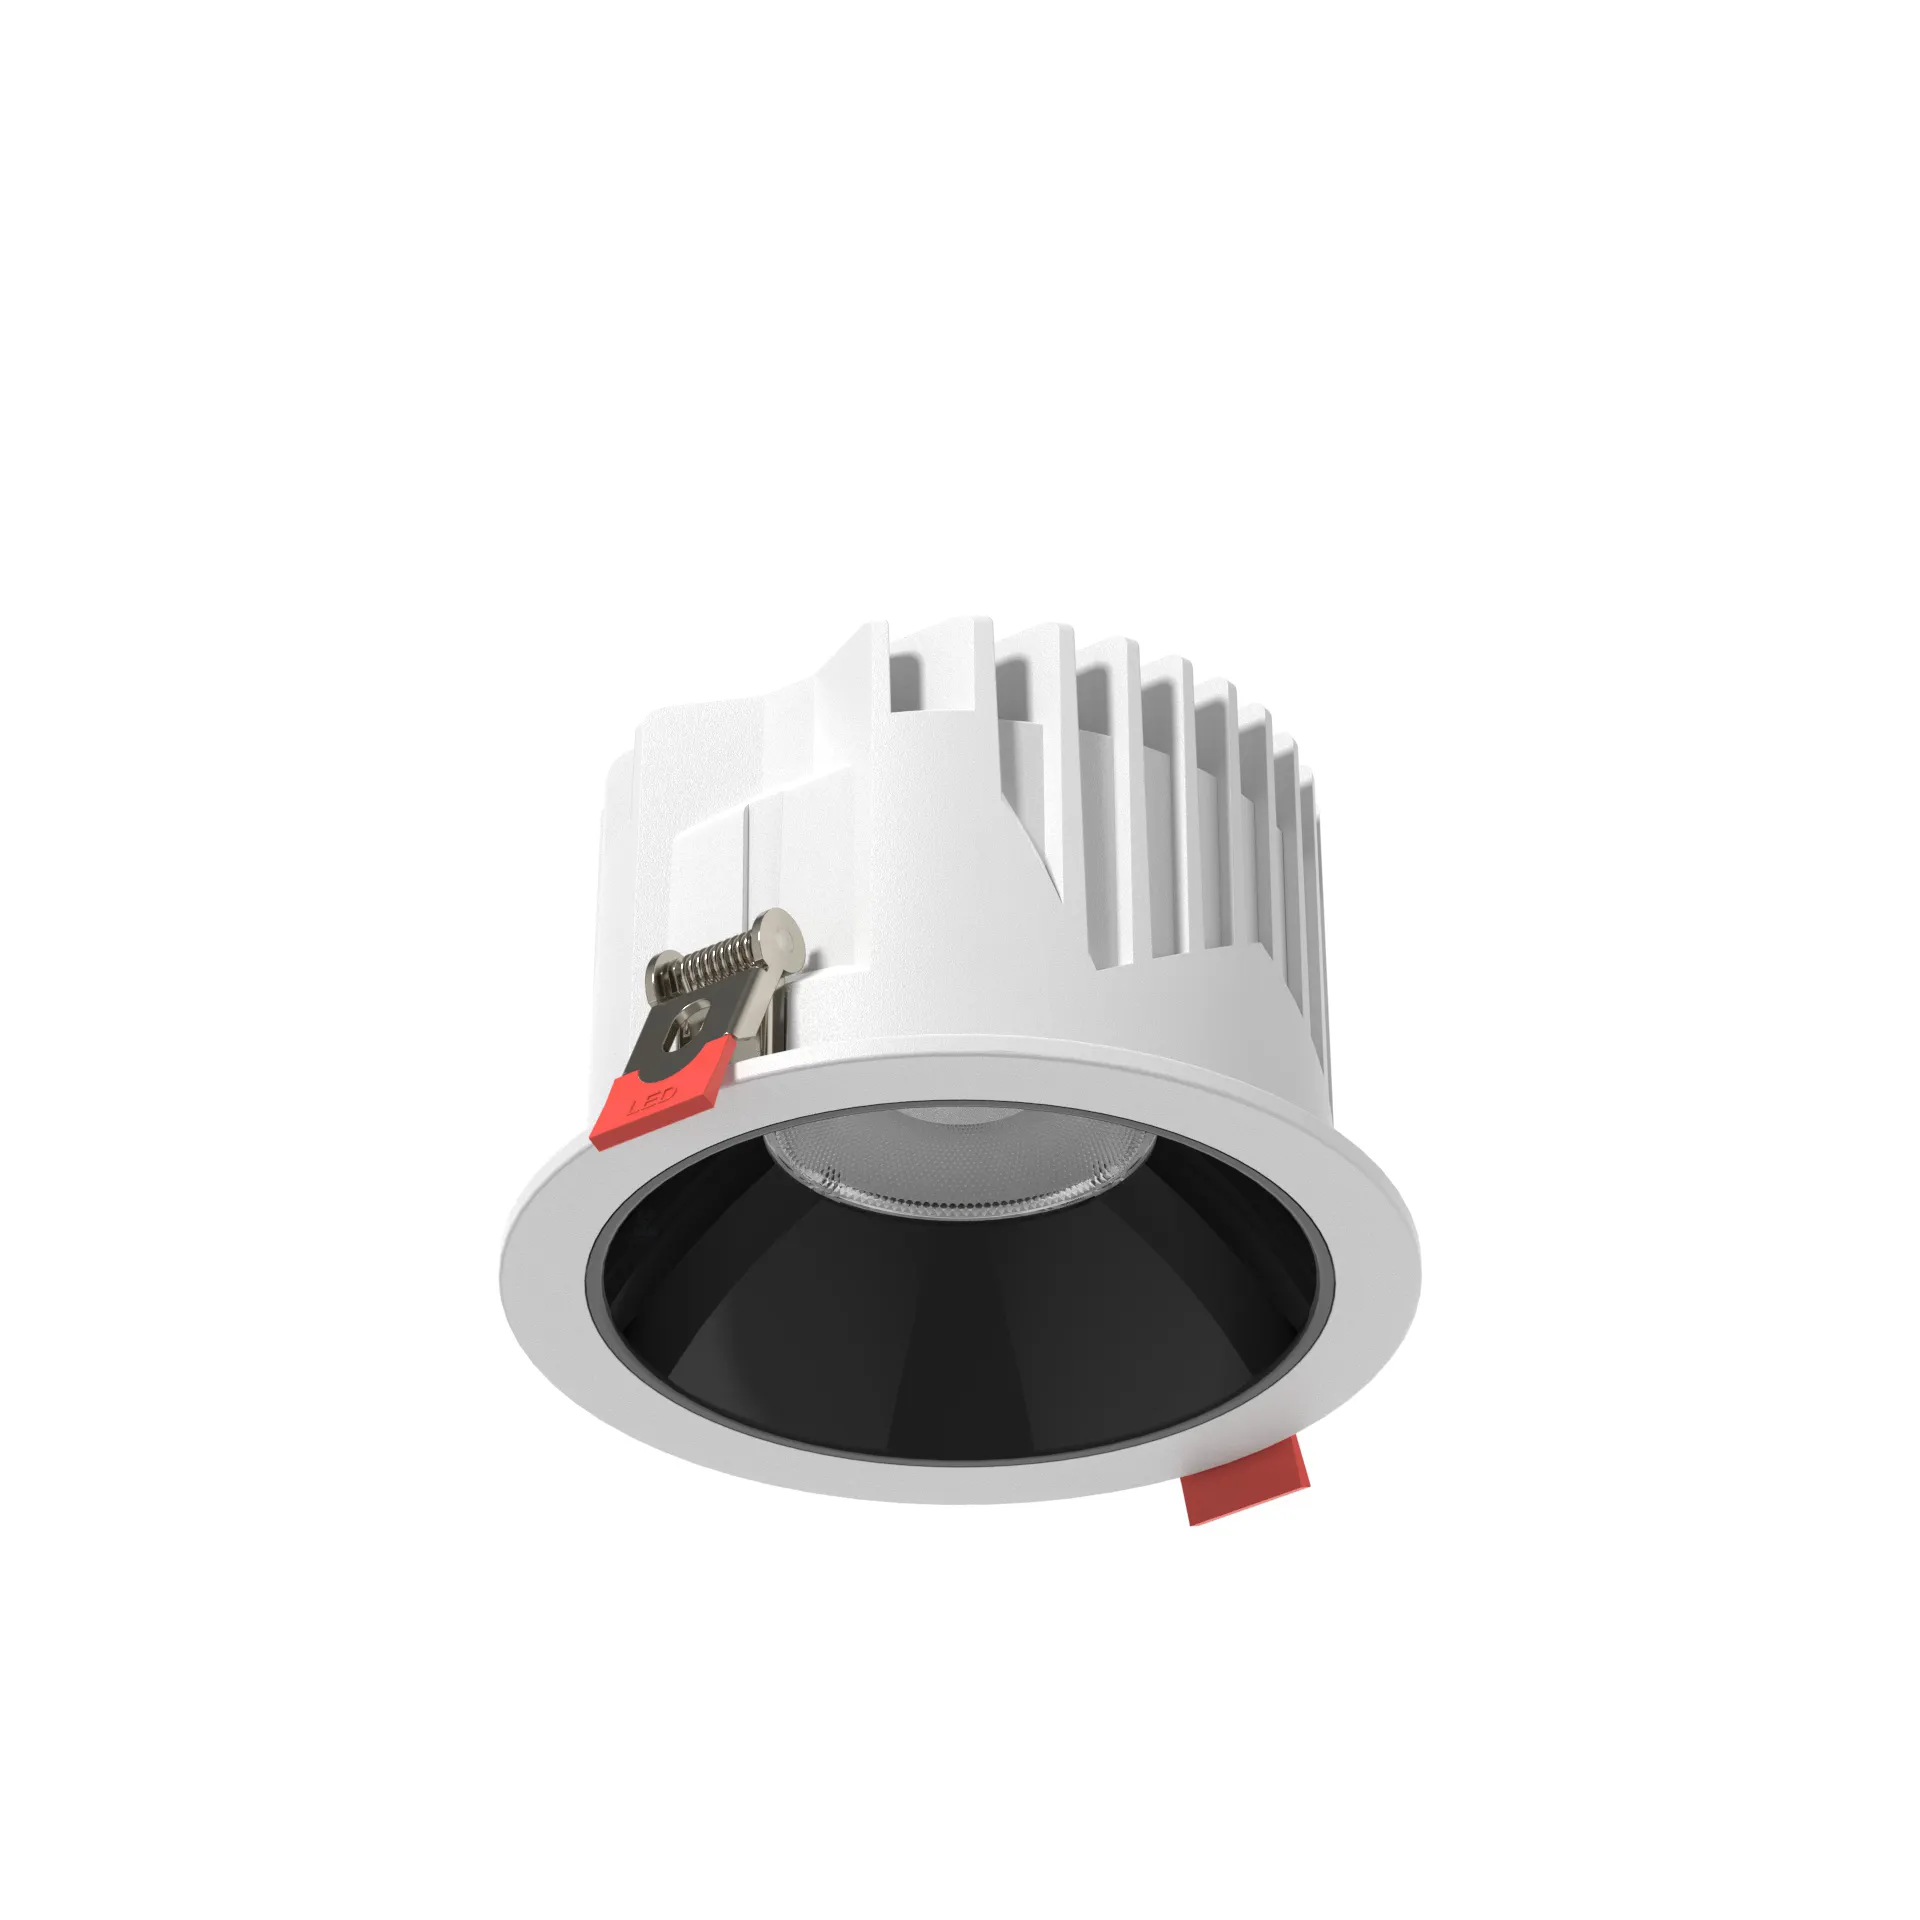 10W 30W 50W 70W IP44 CRI90 with bridgelux chip cutout 100mm die-cast aluminum dimmable recessed led downlight